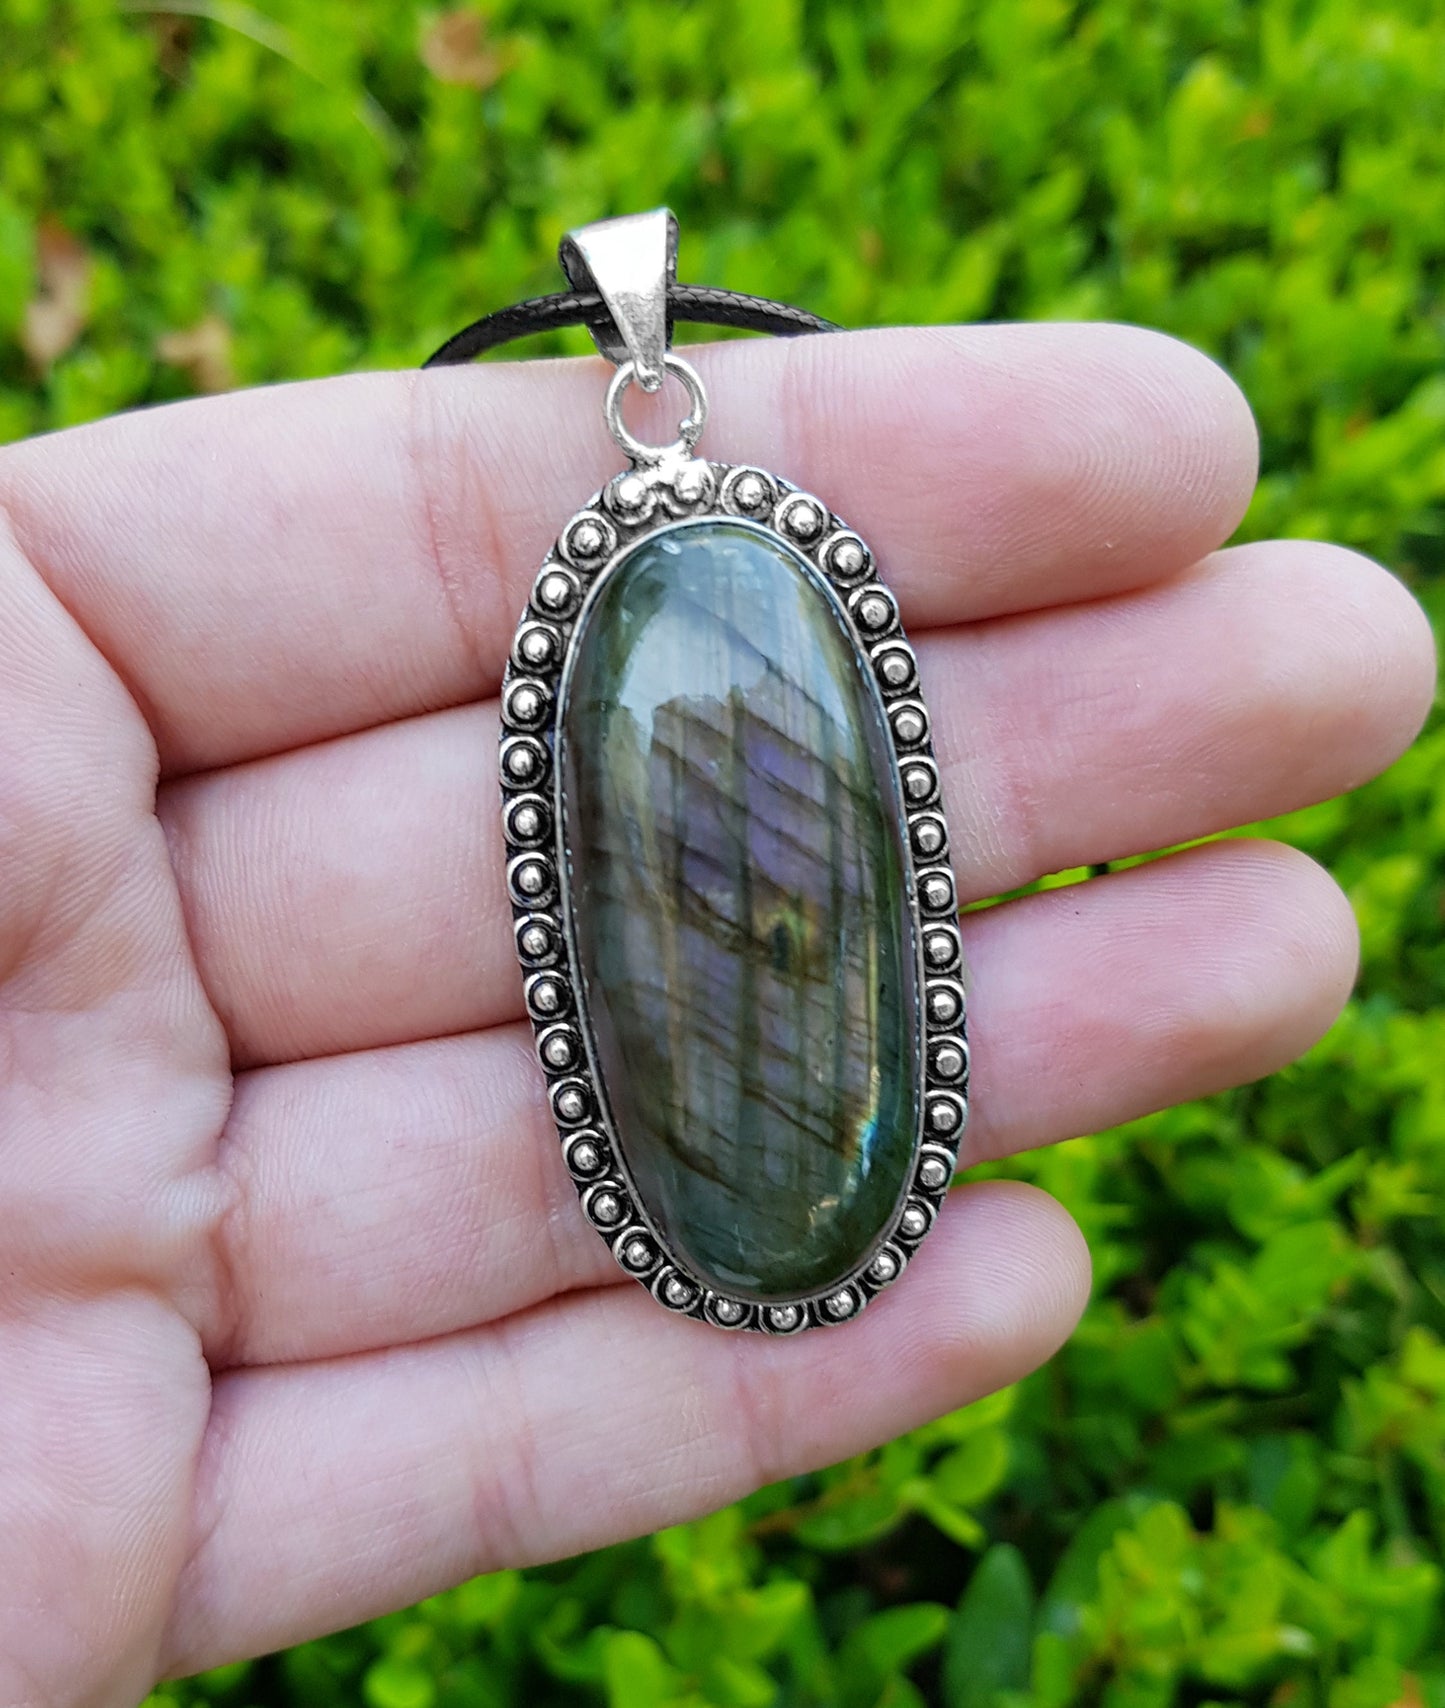 Big Labradorite Pendant In Sterling Silver Statement Necklace Boho Pendant One Of A Kind Gift